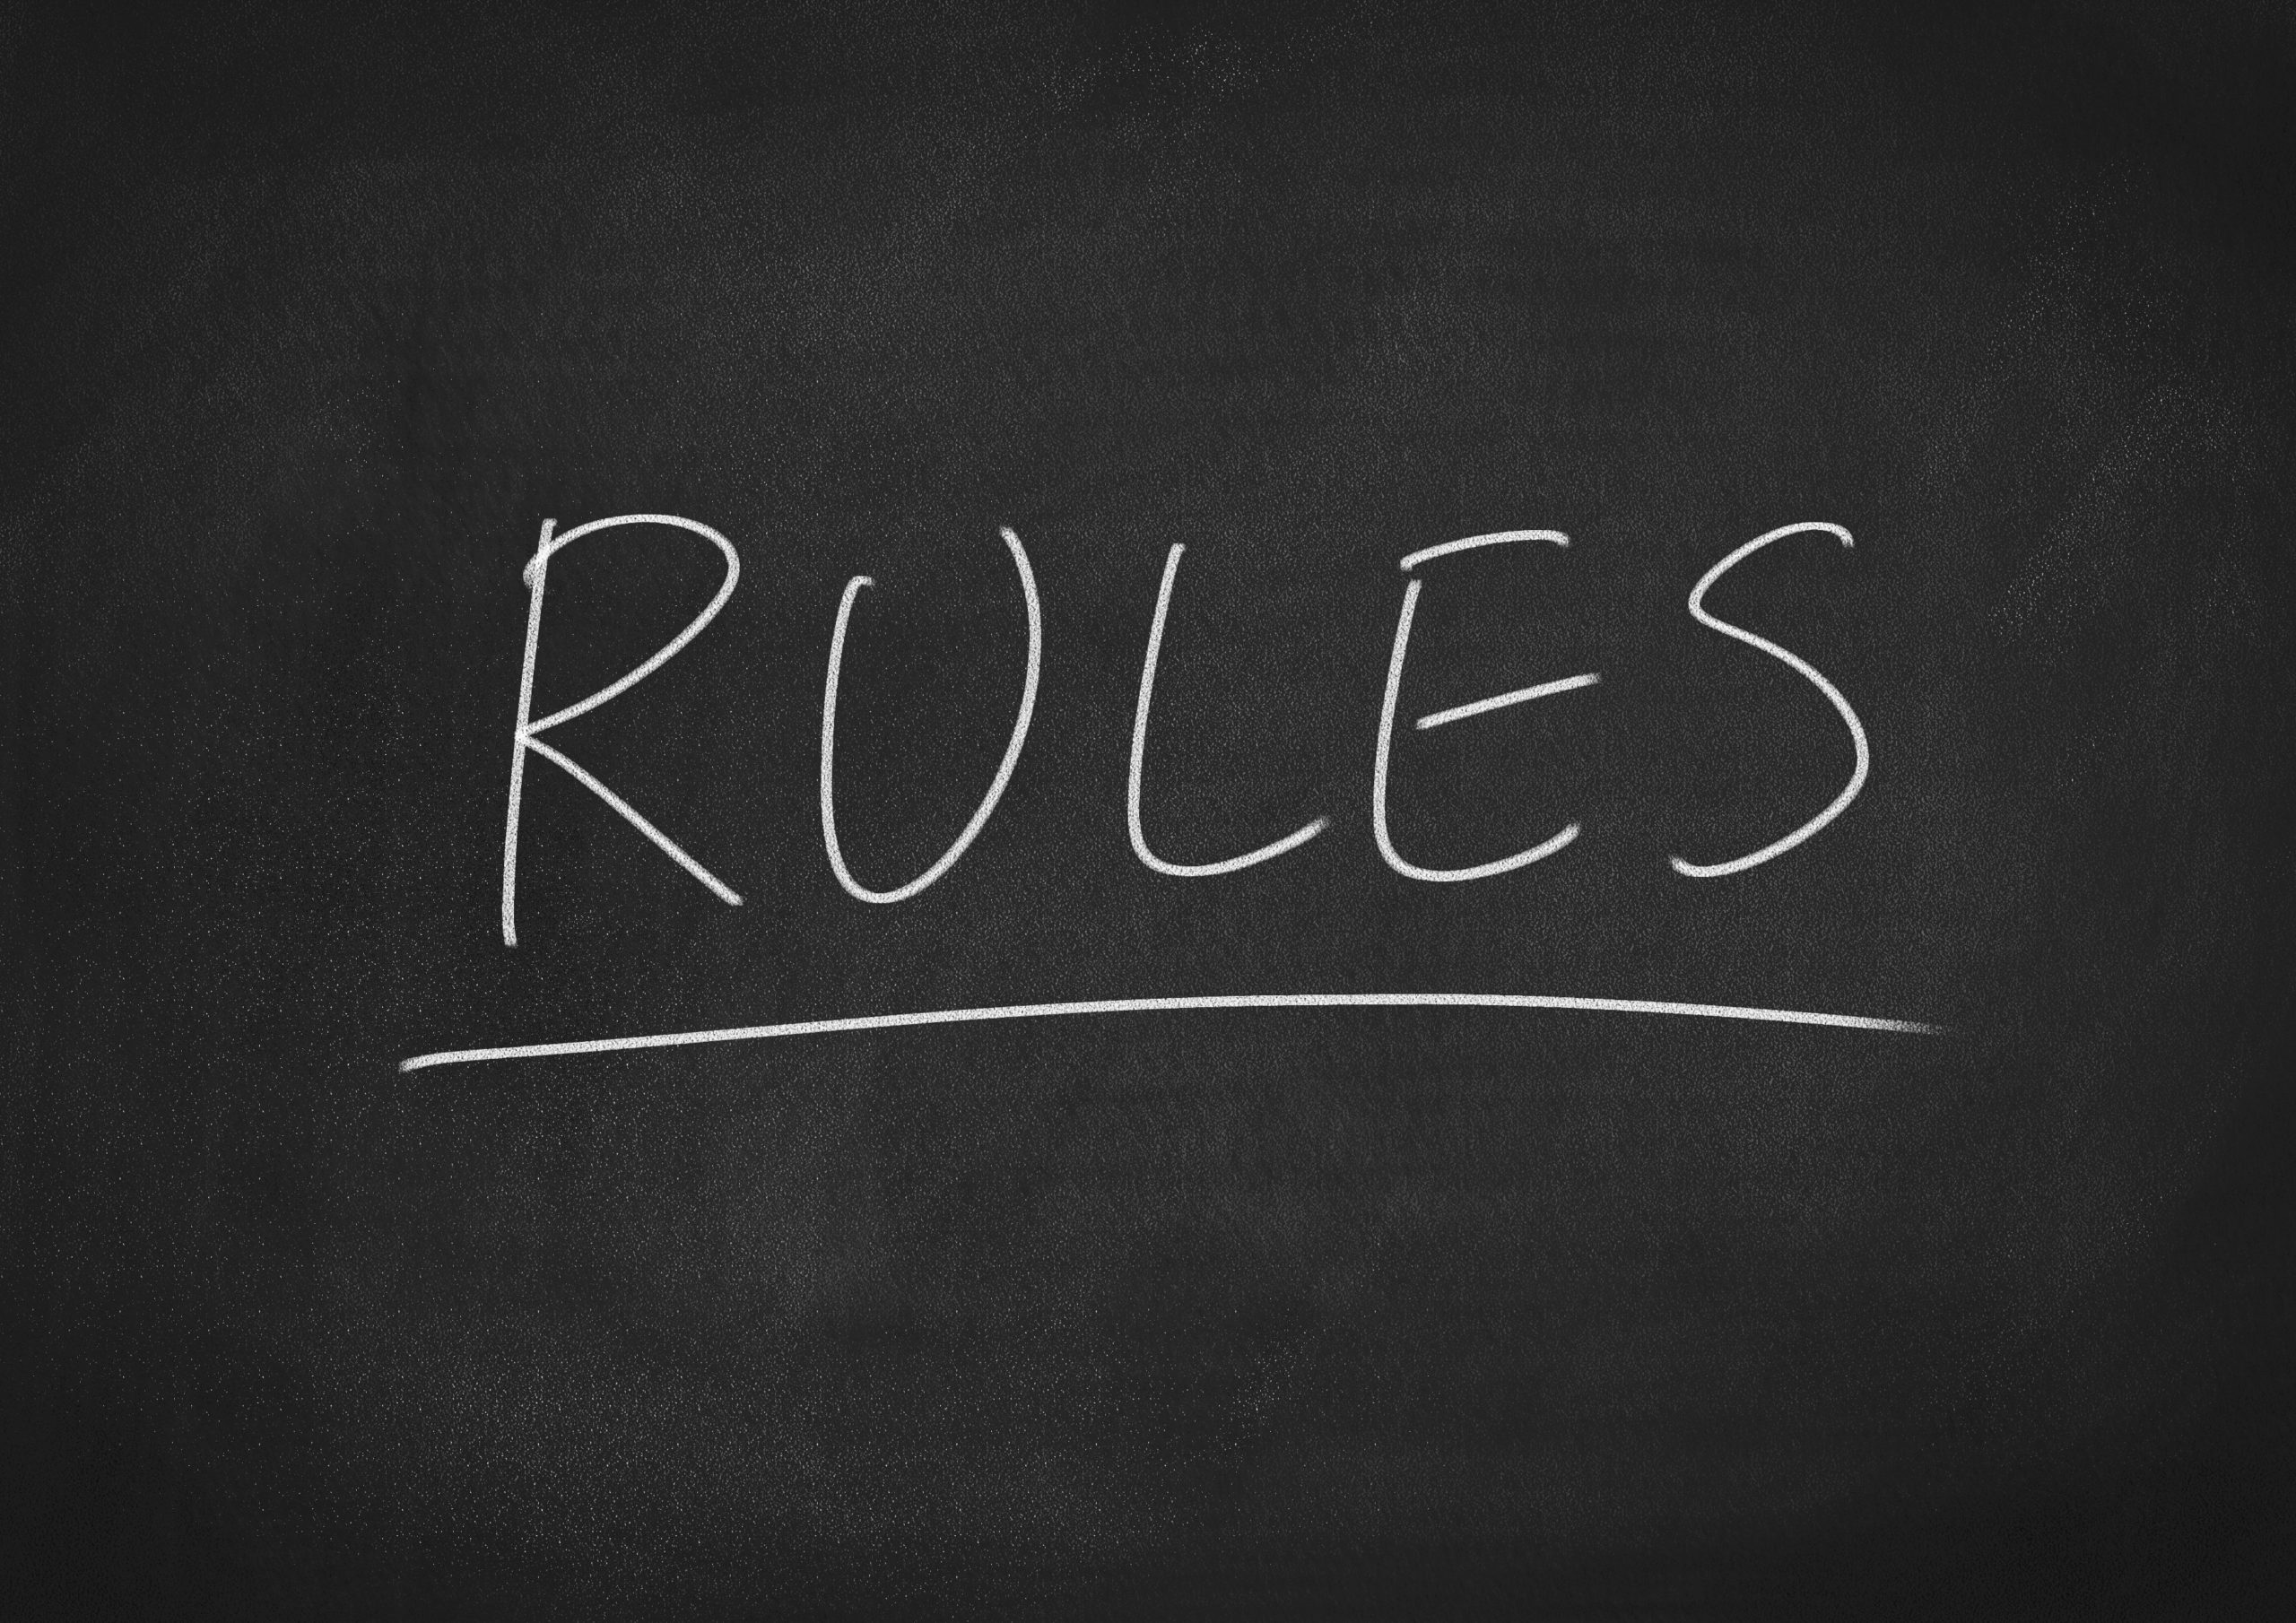 rules concept word on a chalkboard background